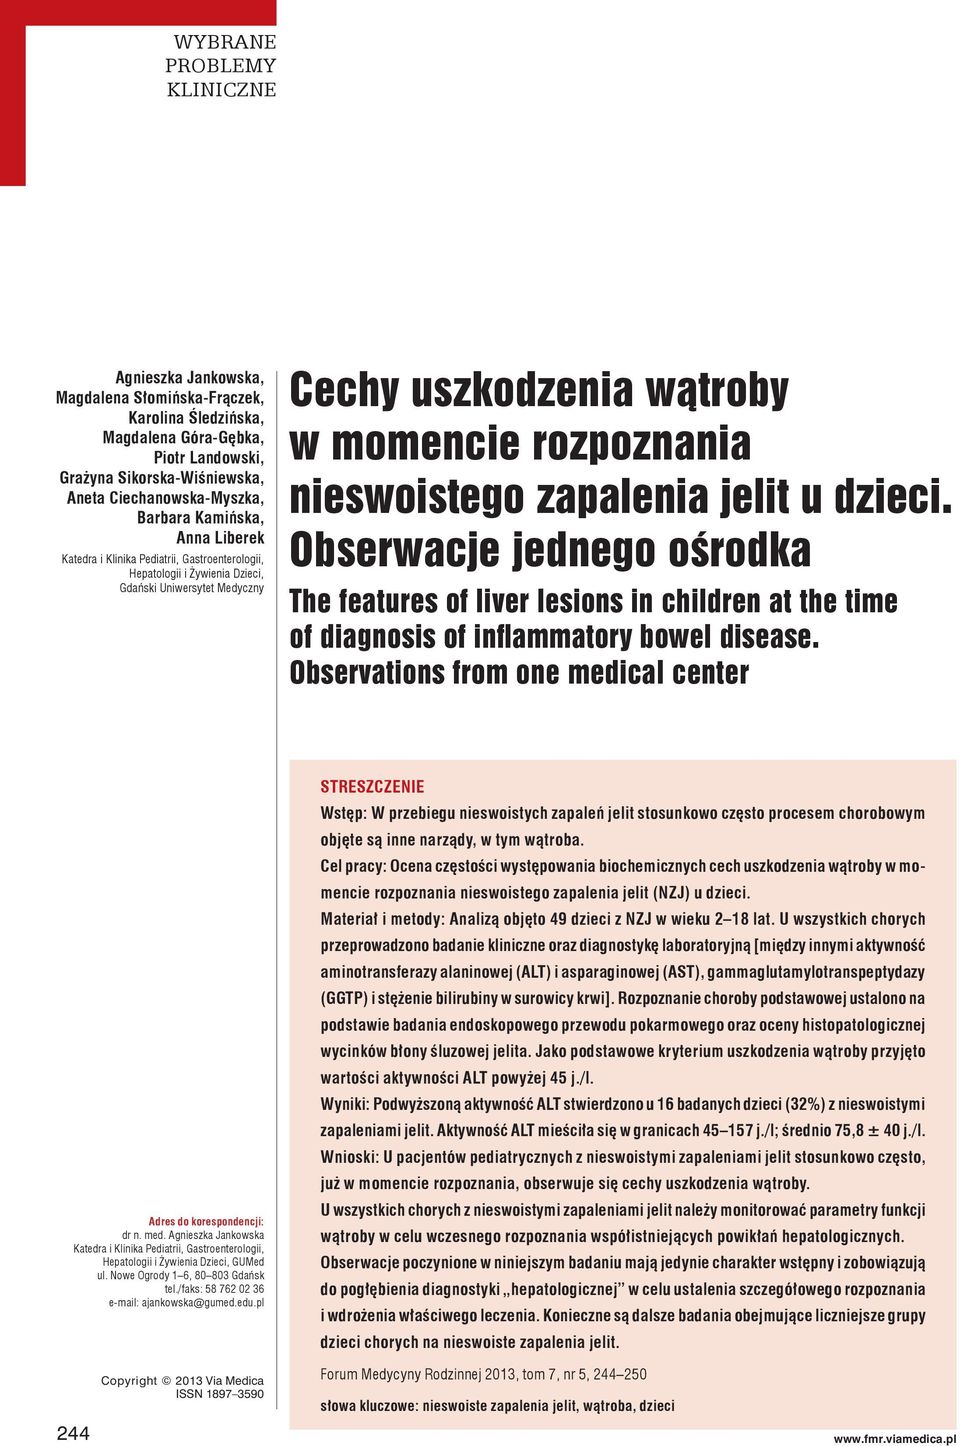 Obserwacje jednego ośrodka The features of liver lesions in children at the time of diagnosis of inflammatory bowel disease. Observations from one medi